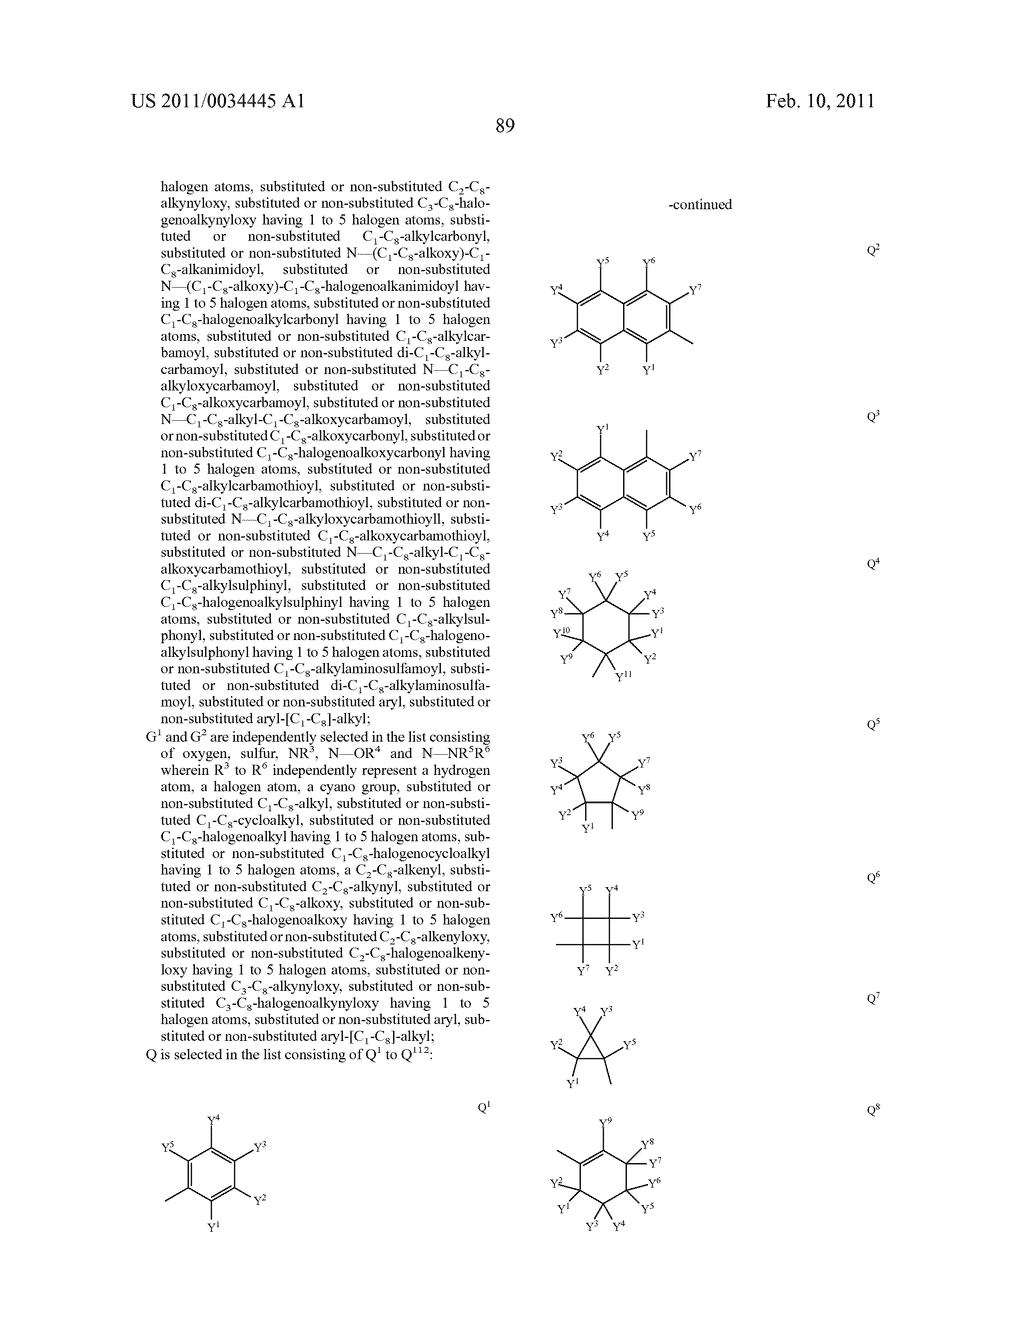 FUNGICIDE HYDROXIMOYL-HETEROCYCLES DERIVATIVES - diagram, schematic, and image 90